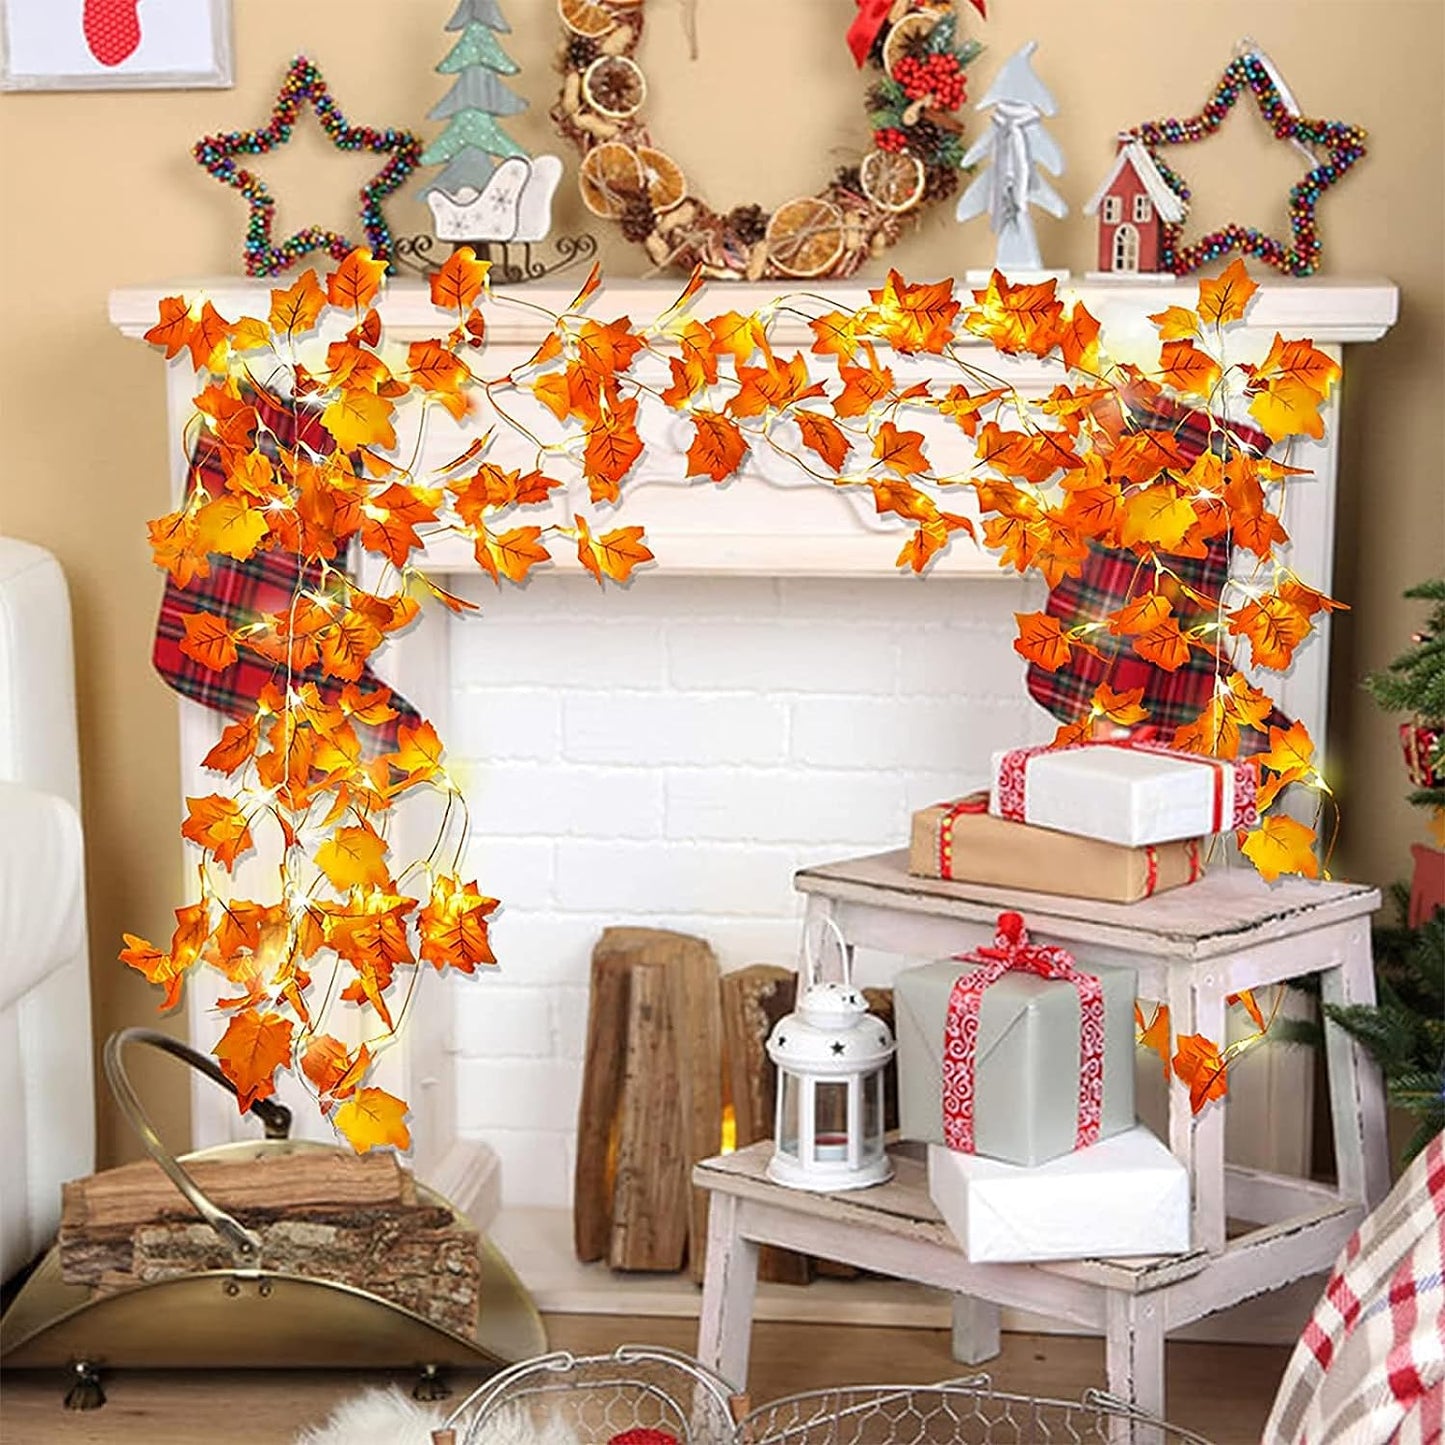 2 Pack Fall Decor Thanksgiving Decorations for Home Lighted Fall Garland, Total 16.4Ft 50LED Fall Halloween Decorations Maple Leaves String Lights Battery Operated Indoor Outdoor Autumn Harvest Decor